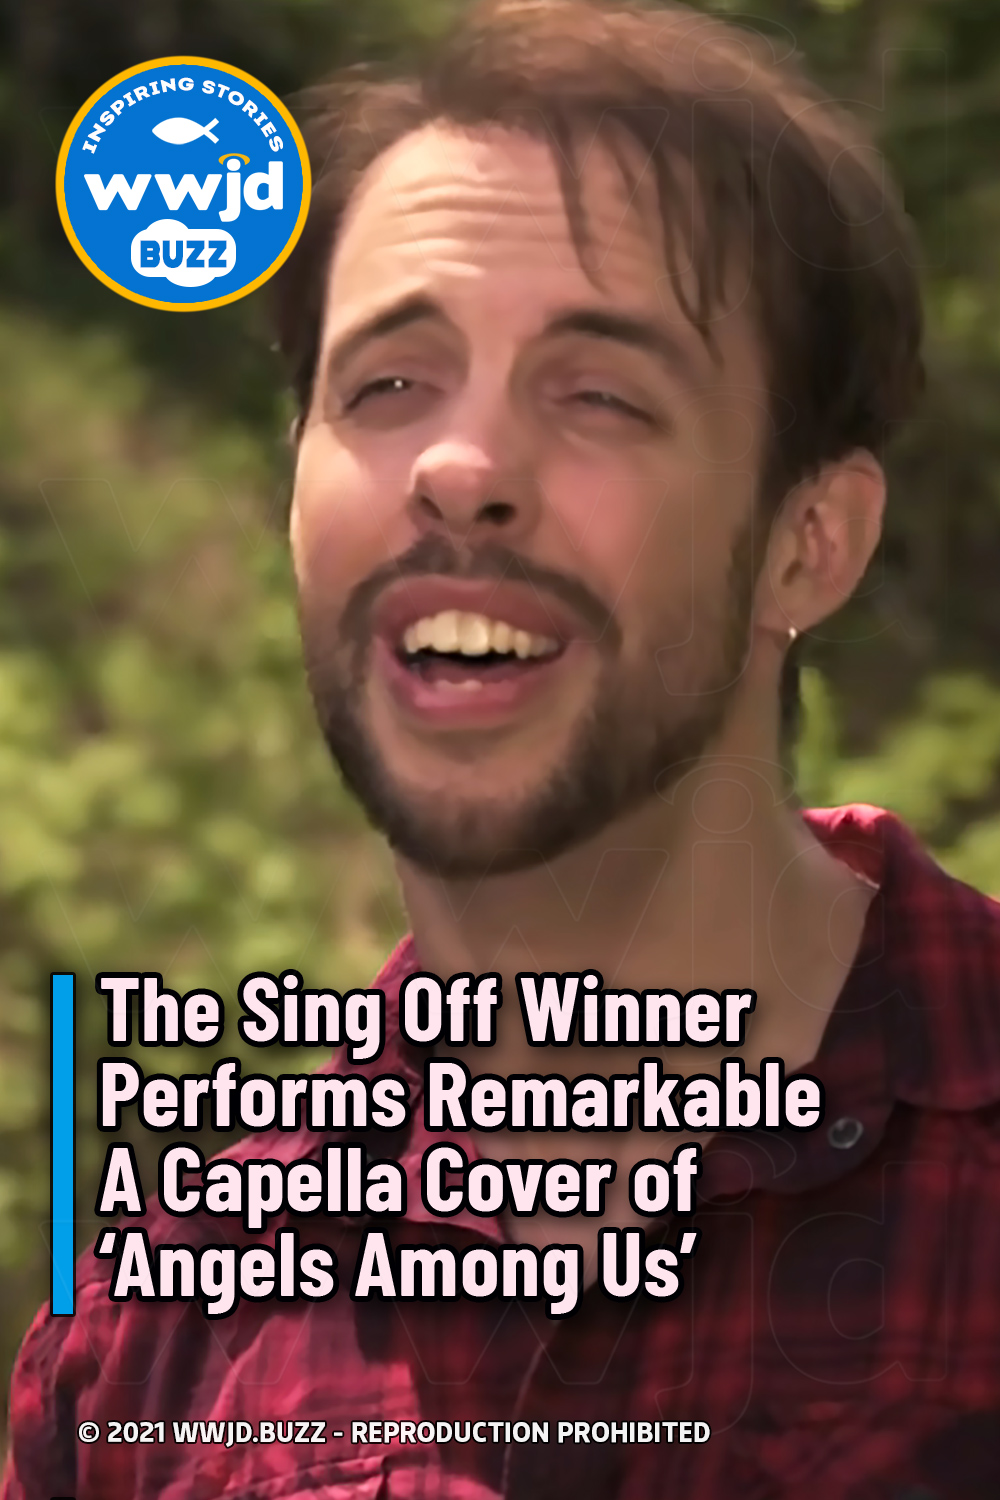 The Sing Off Winner Performs Remarkable A Capella Cover of ‘Angels Among Us’